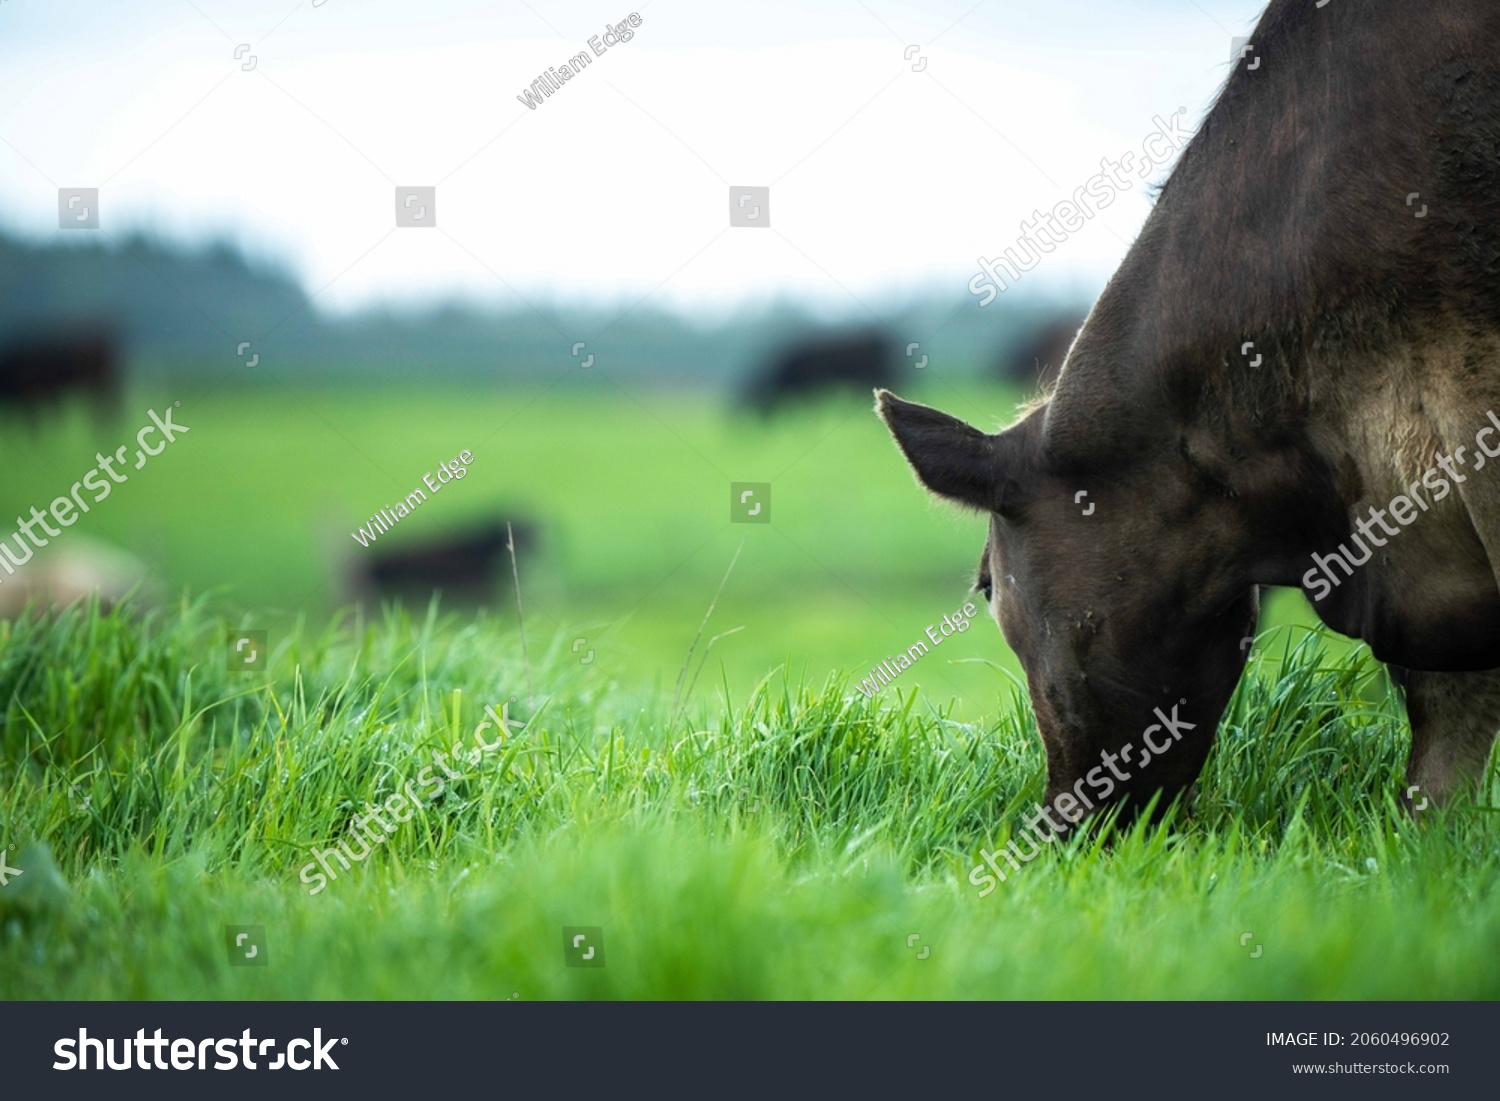 Stud Beef bulls, cows and calves grazing on grass in a field, in Australia. breeds of cattle include speckled park, murray grey, angus, brangus and wagyu on long pasture in spring and summer #2060496902